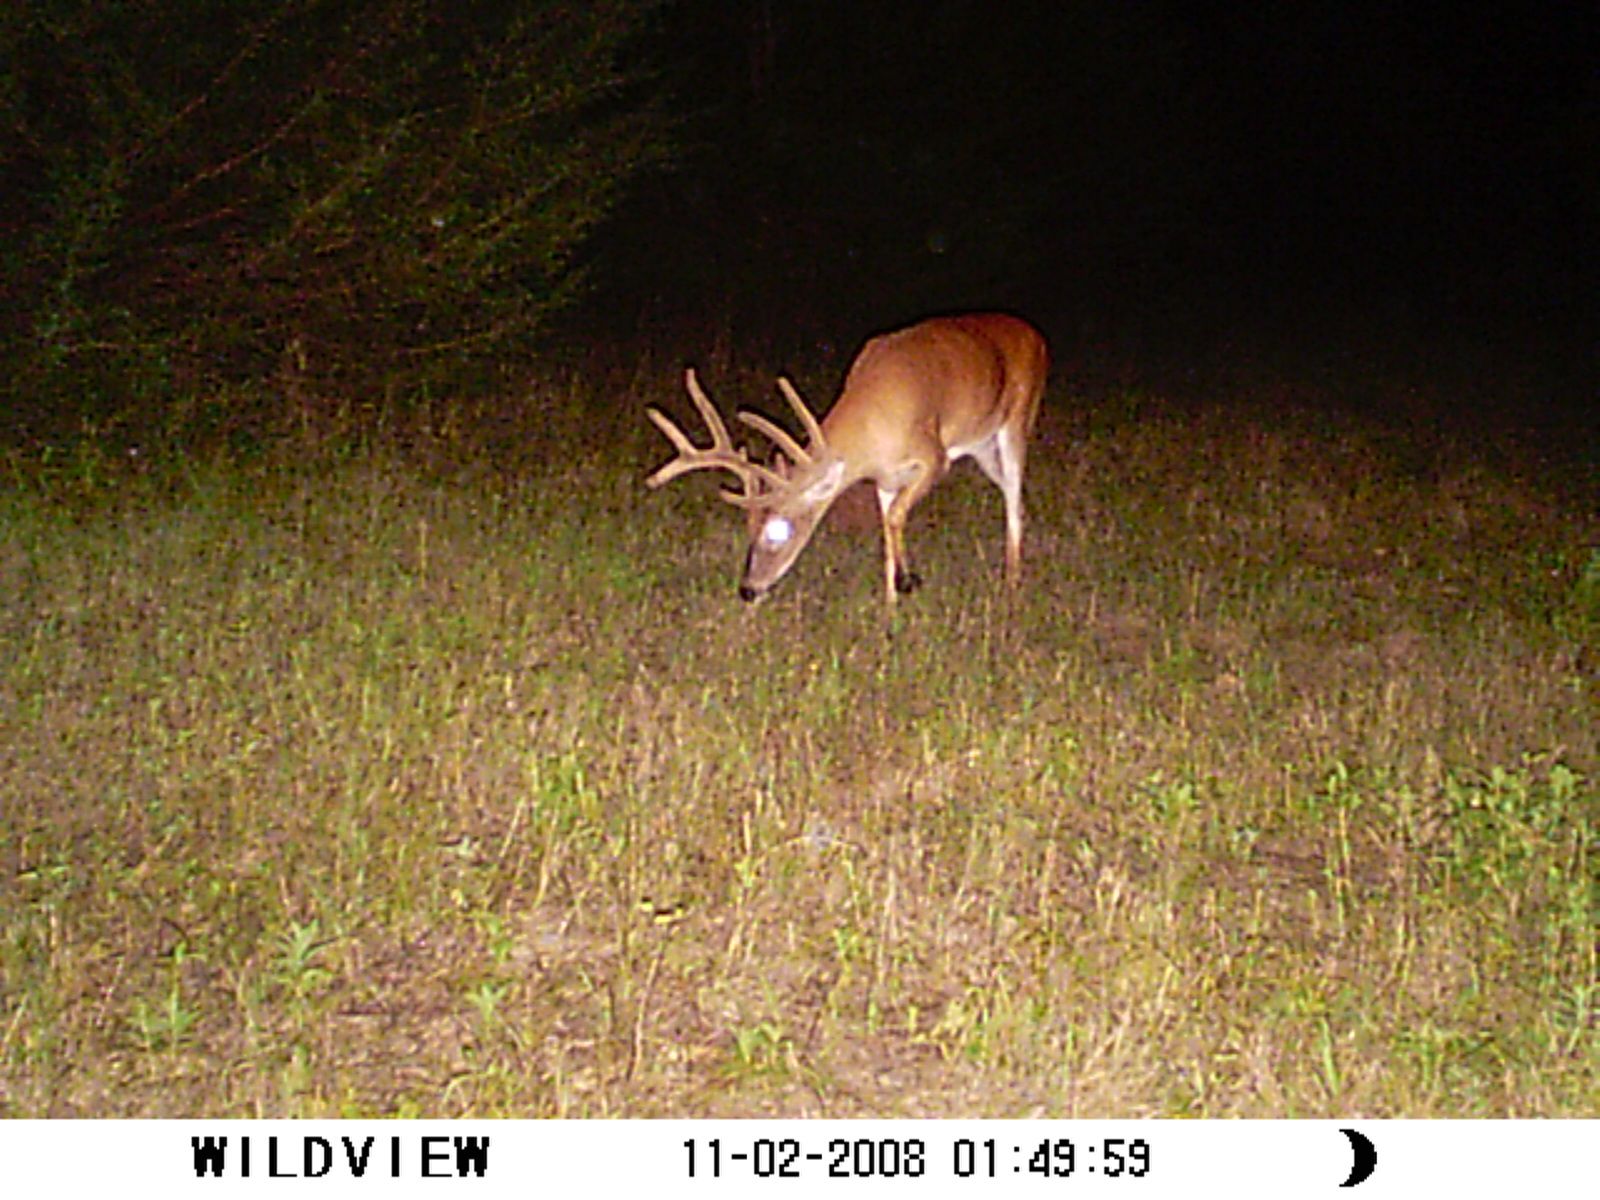 What Do You Think About This Buck?